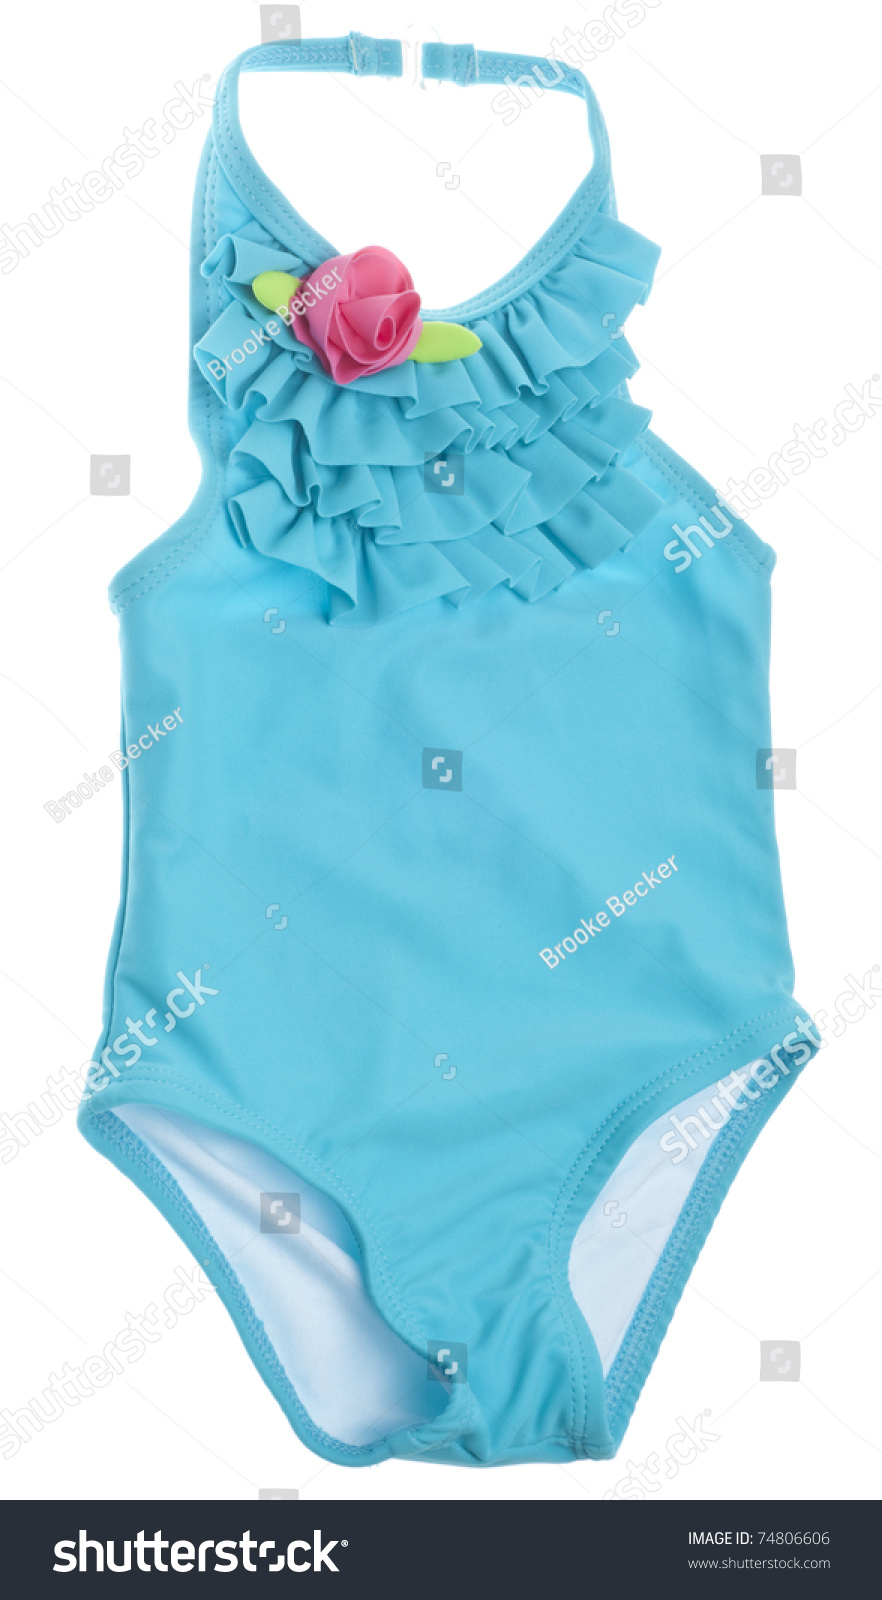 Blue Summer Bathing Suit with Pink Rose Isolated on White with a Clipping Path. #74806606